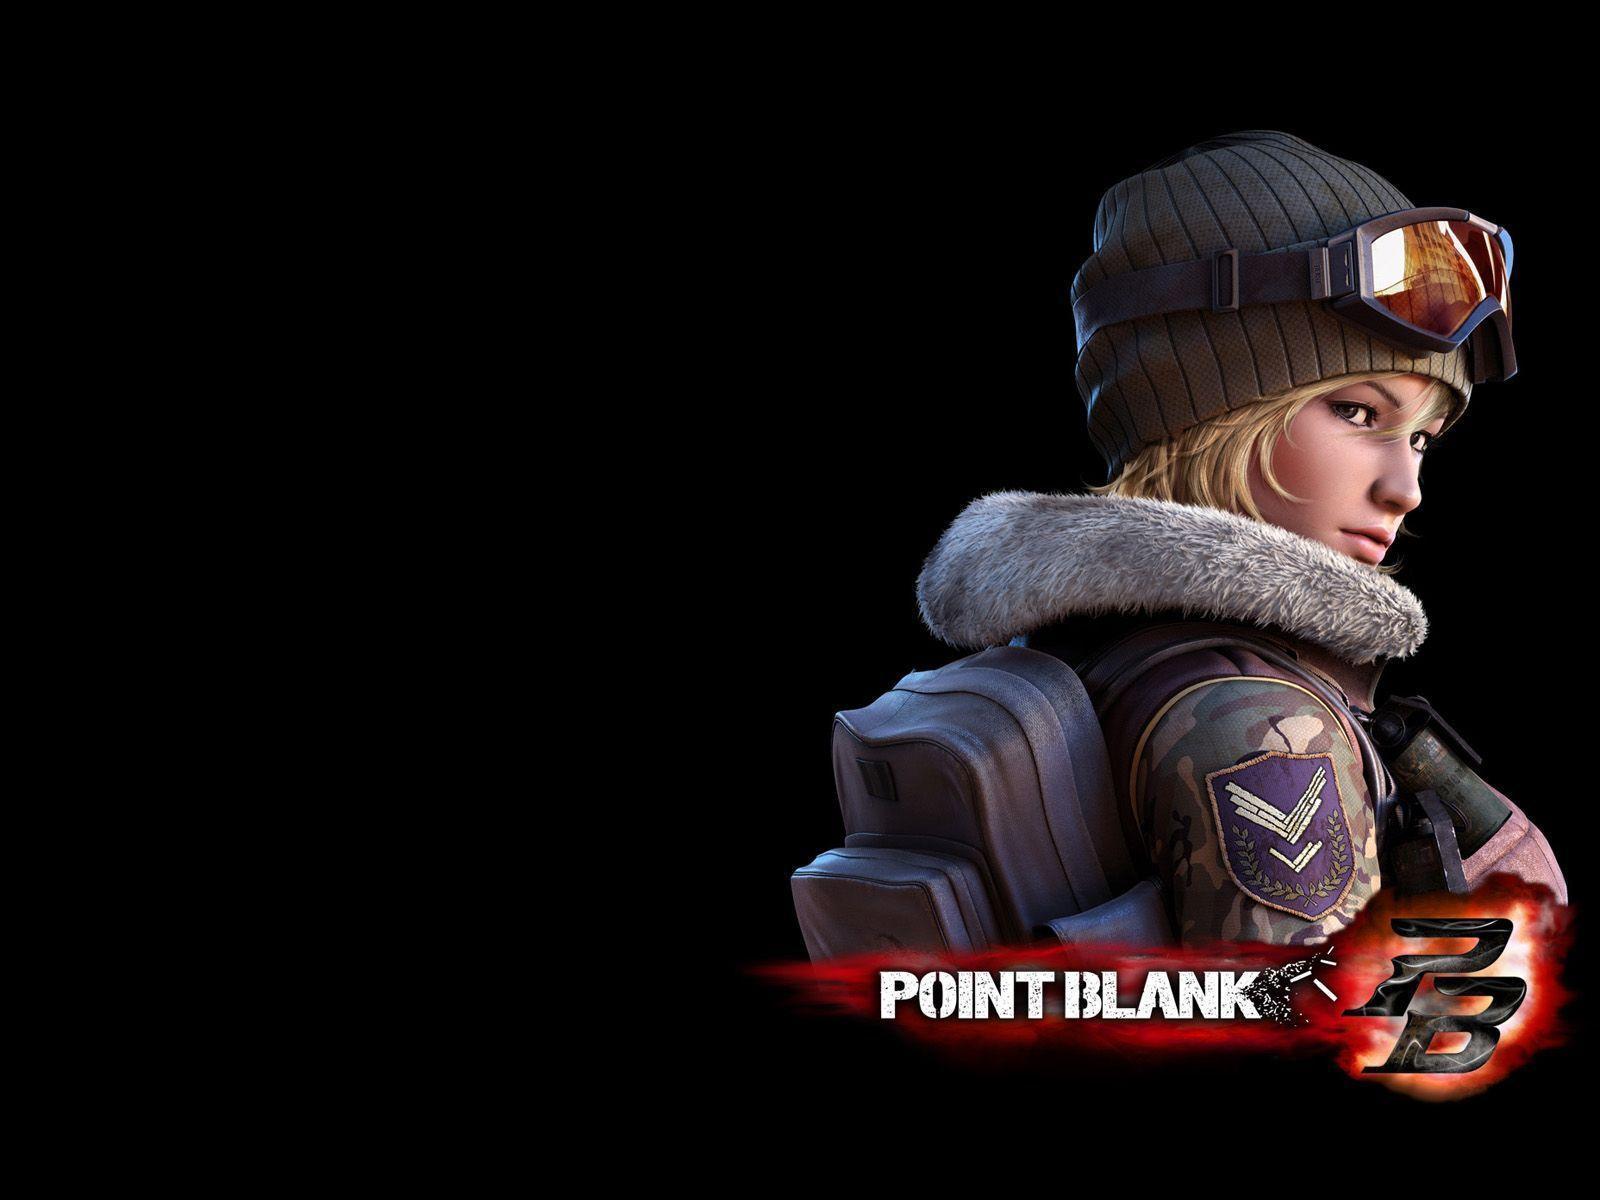 Point Blank free Wallpaper (31 photo) for your desktop, download